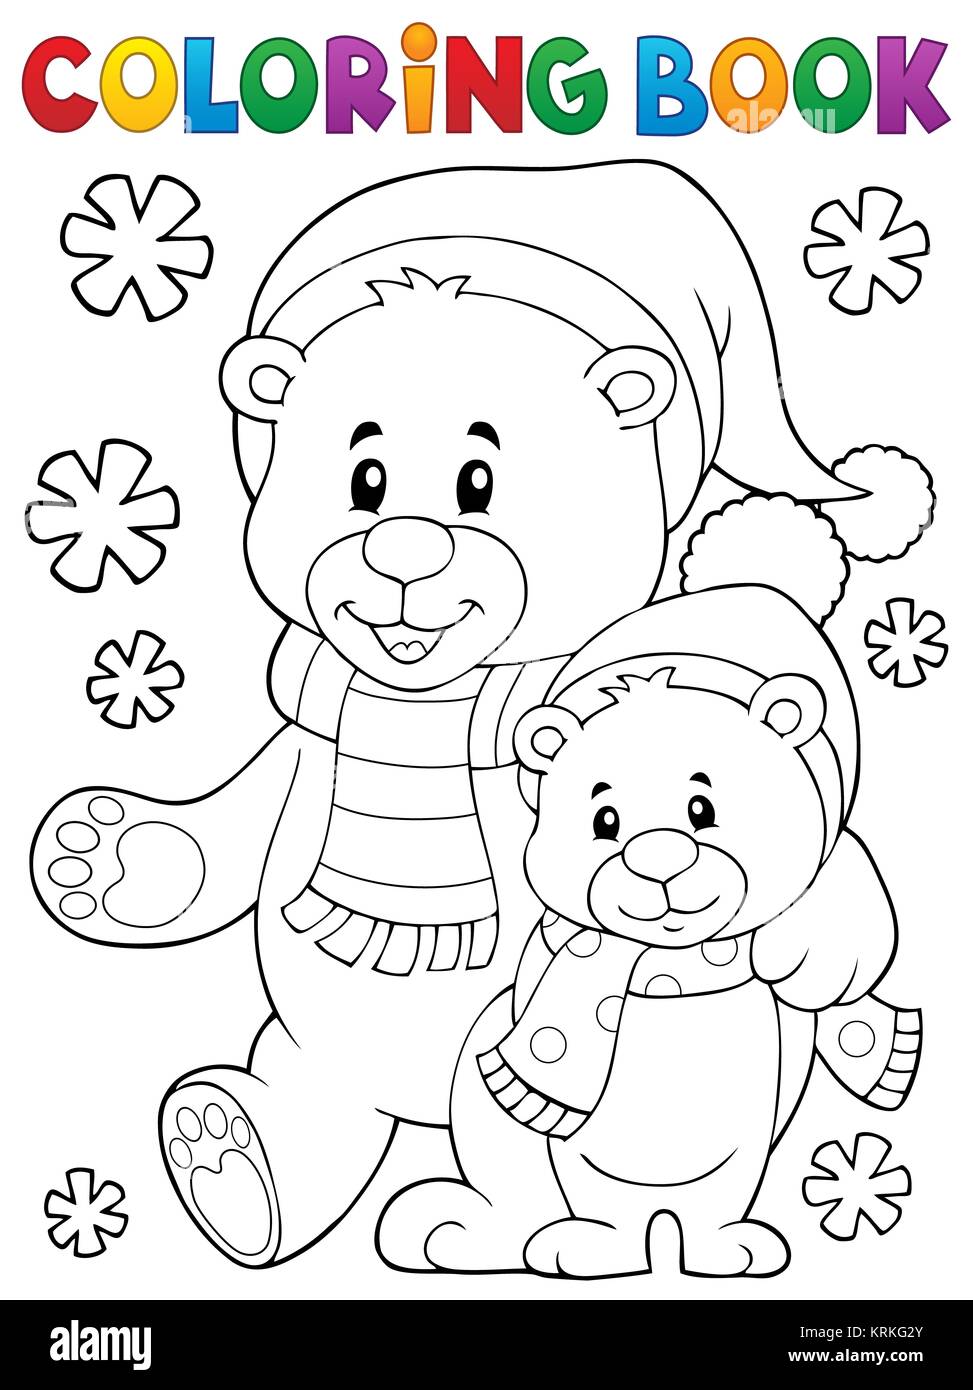 82 Winter Animal Coloring Pages Best